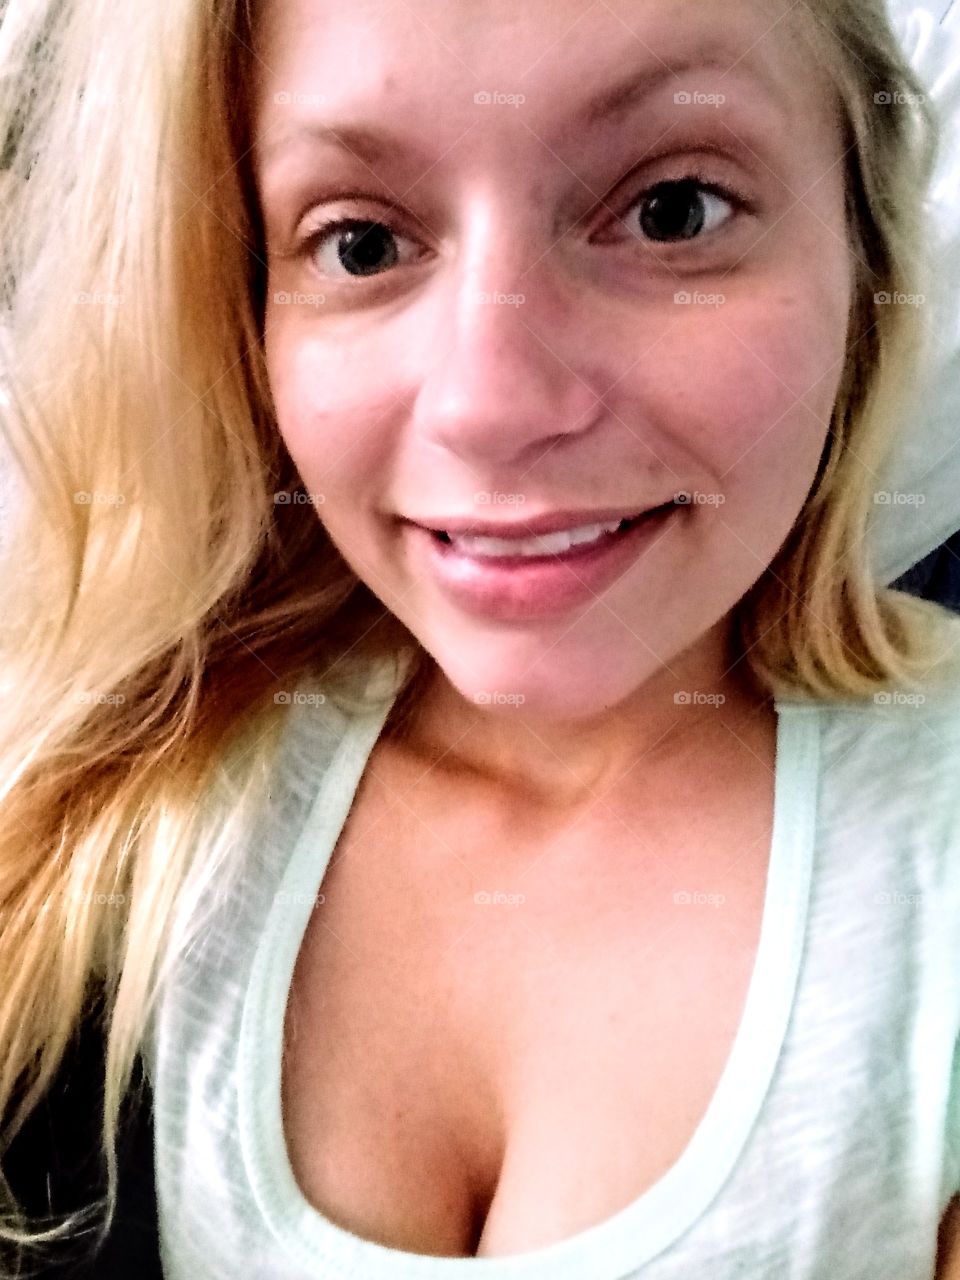 Cute youbg blond wearing no makeup